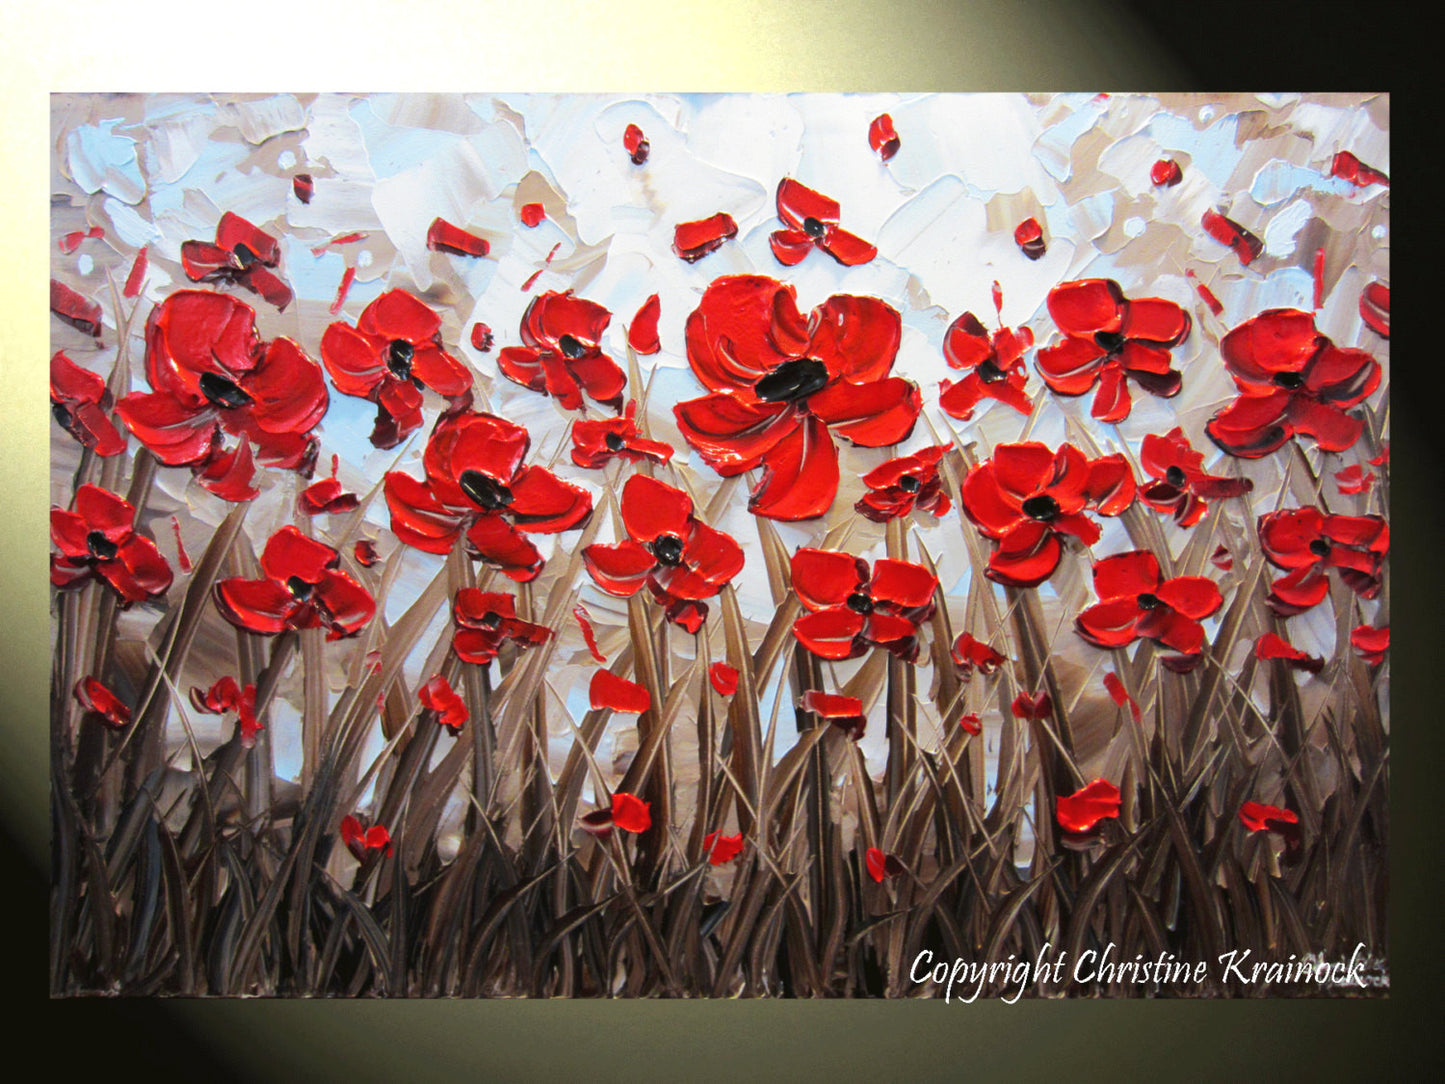 SOLD ORIGINAL Art Abstract Painting Red Poppy Flowers Textured Modern Poppies Palette Knife Blue Brown Floral Large Wall Decor 24x36" -Christine - Christine Krainock Art - Contemporary Art by Christine - 1